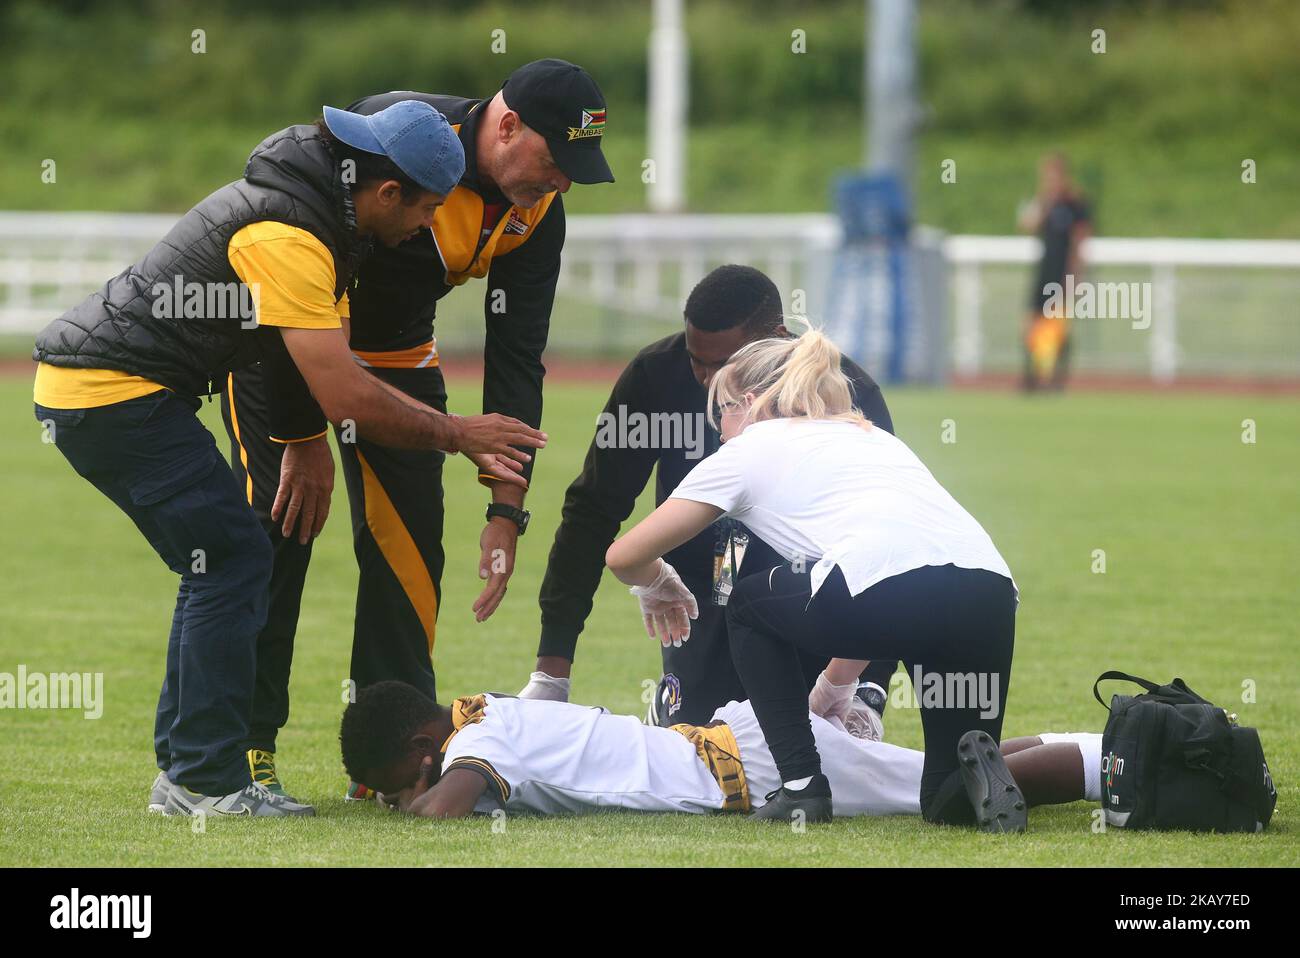 Romeo Sibanda of Mtabeleland getting treatment from Bruce Grobbelaar during Conifa Paddy Power World Football Cup 2018 Quarterfinal B for Places 9-16 match between Matabeleland against Kabylia at Queen Elizabeth II Stadium (Enfield Town FC), London, on 05 June 2018 (Photo by Kieran Galvin/NurPhoto)  Stock Photo